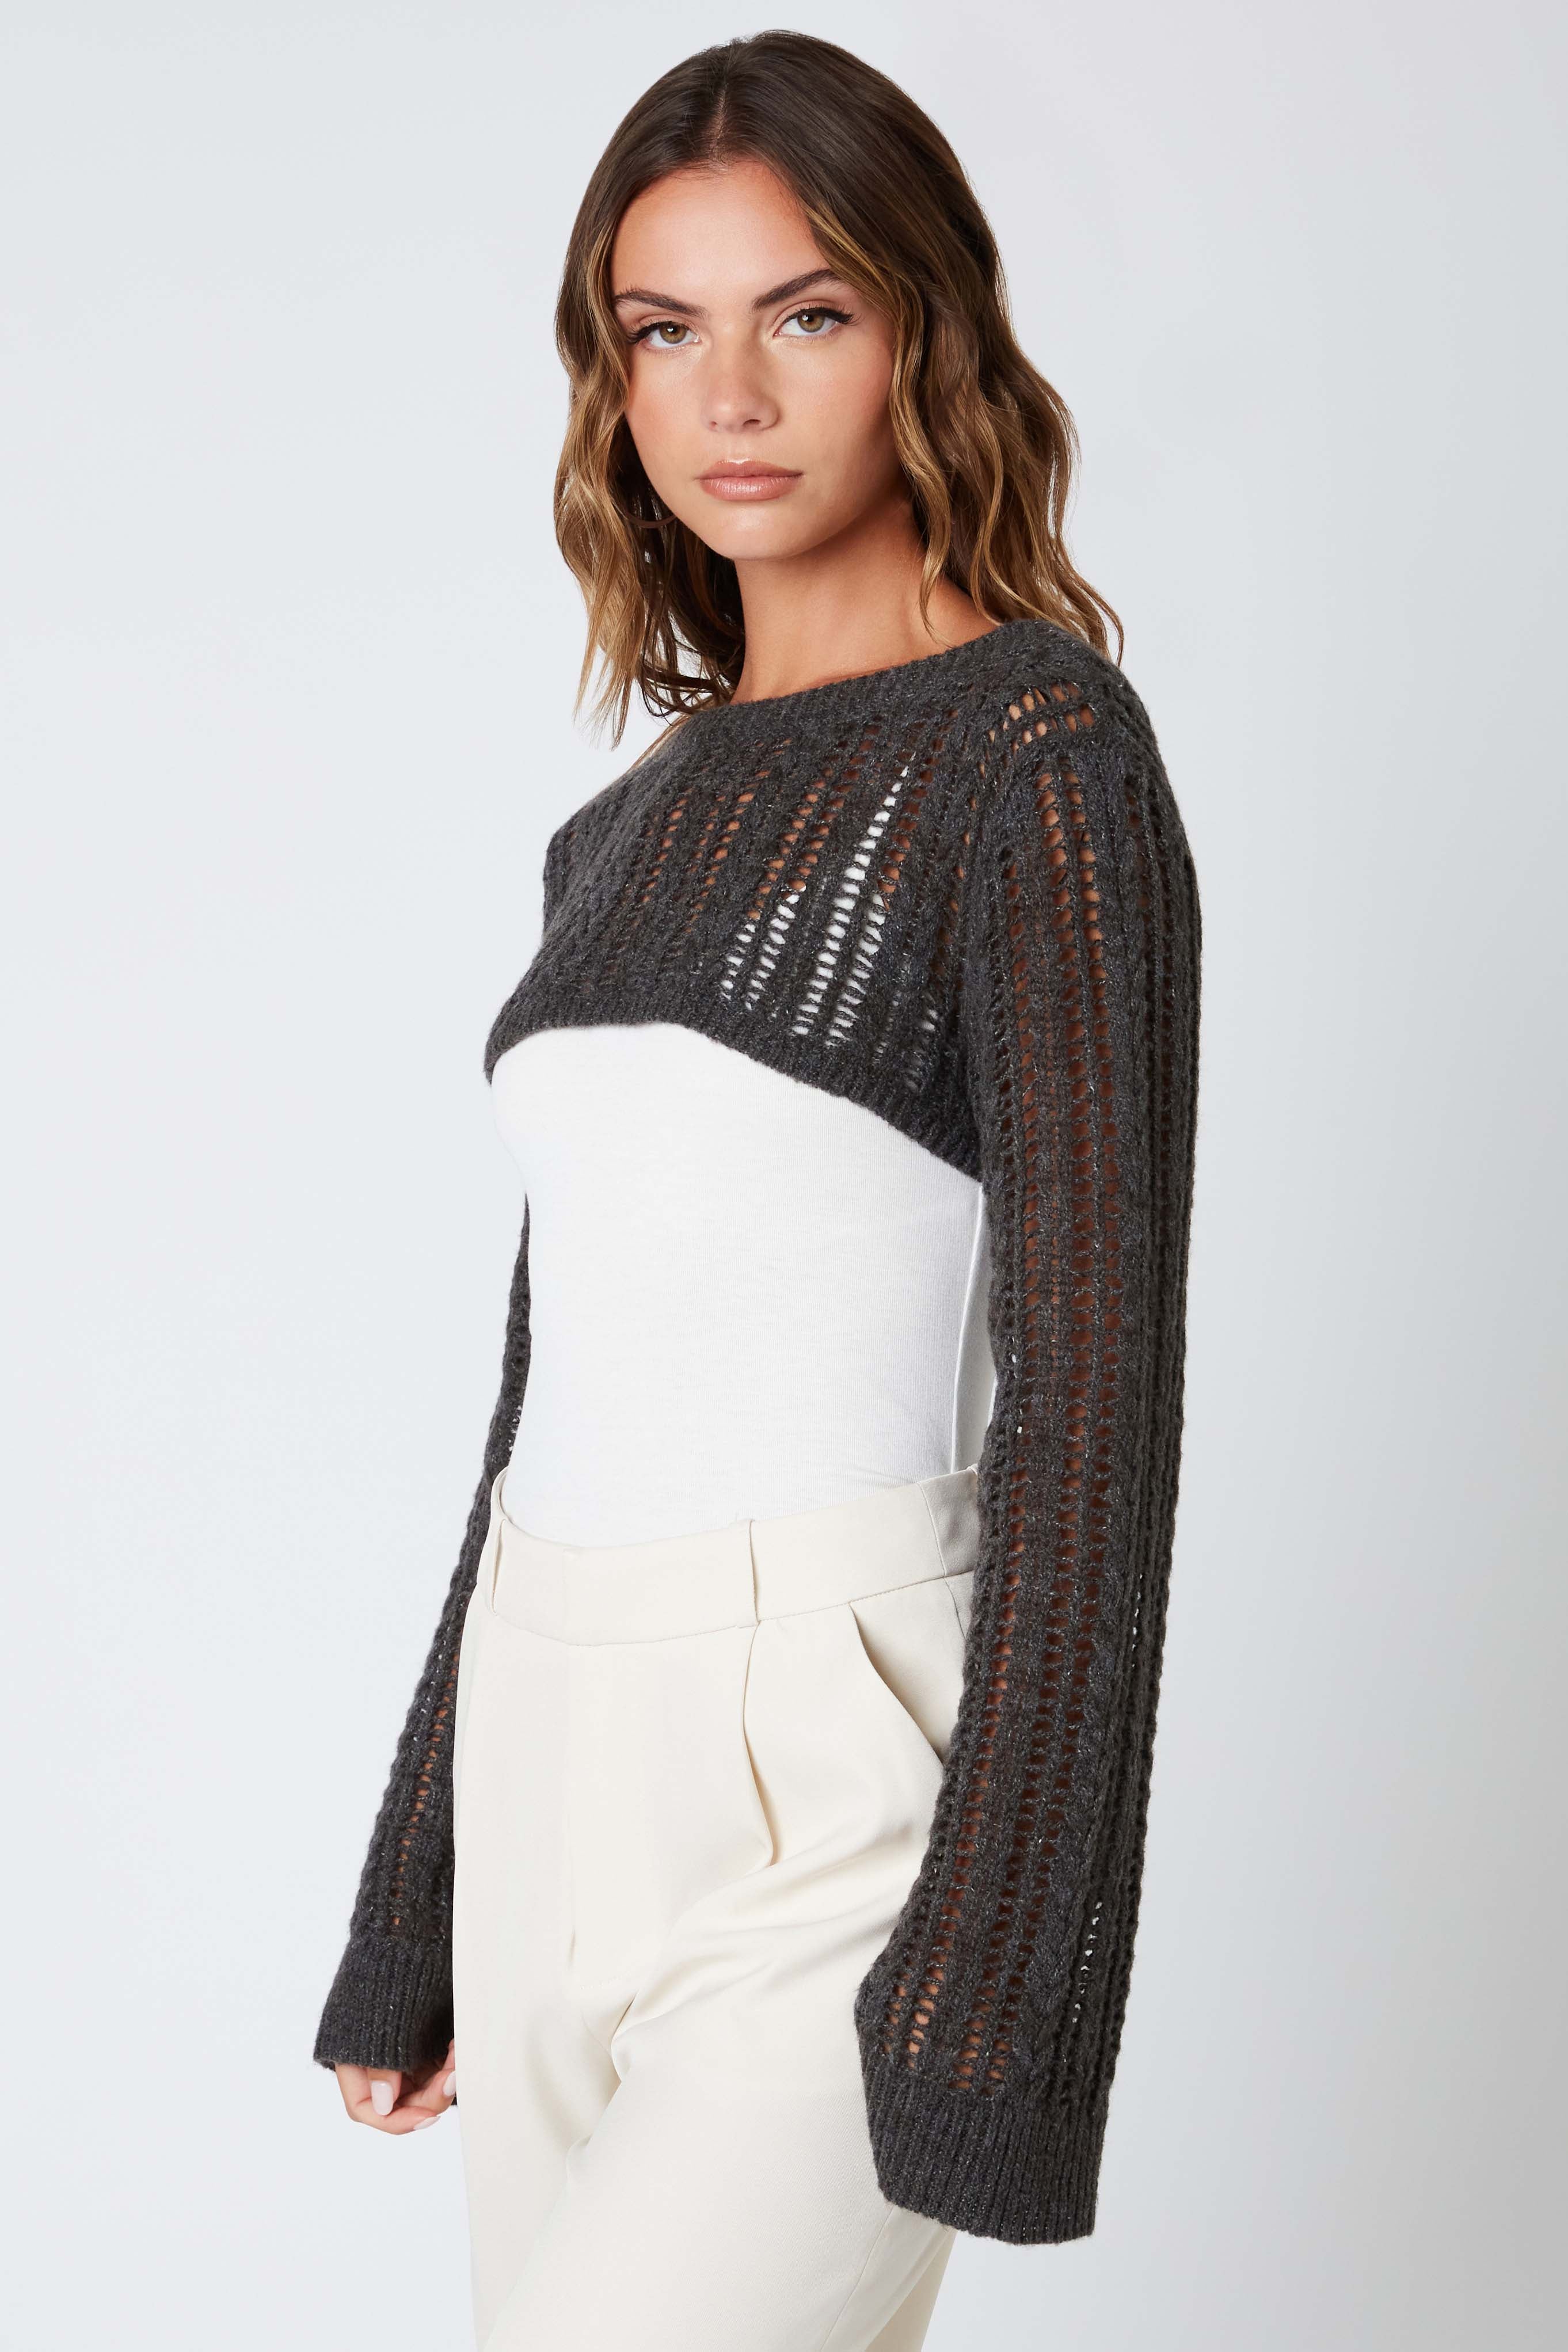 Open Knit Shrug in Charcoal Side View